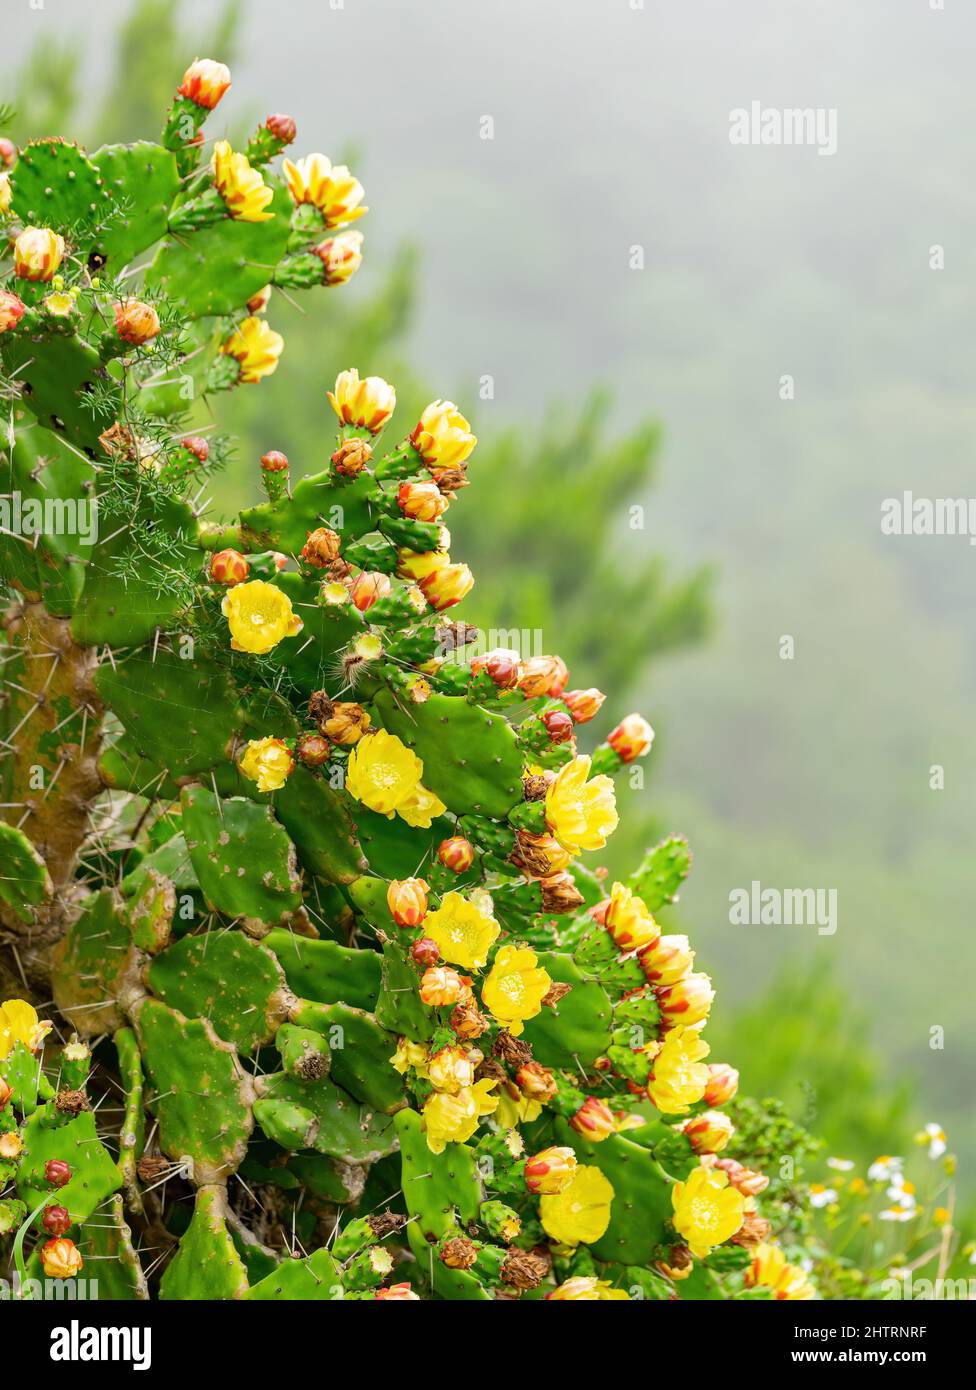 Overcast view of the opuntia cactus blossom at Kinmen, Taiwan Stock Photo